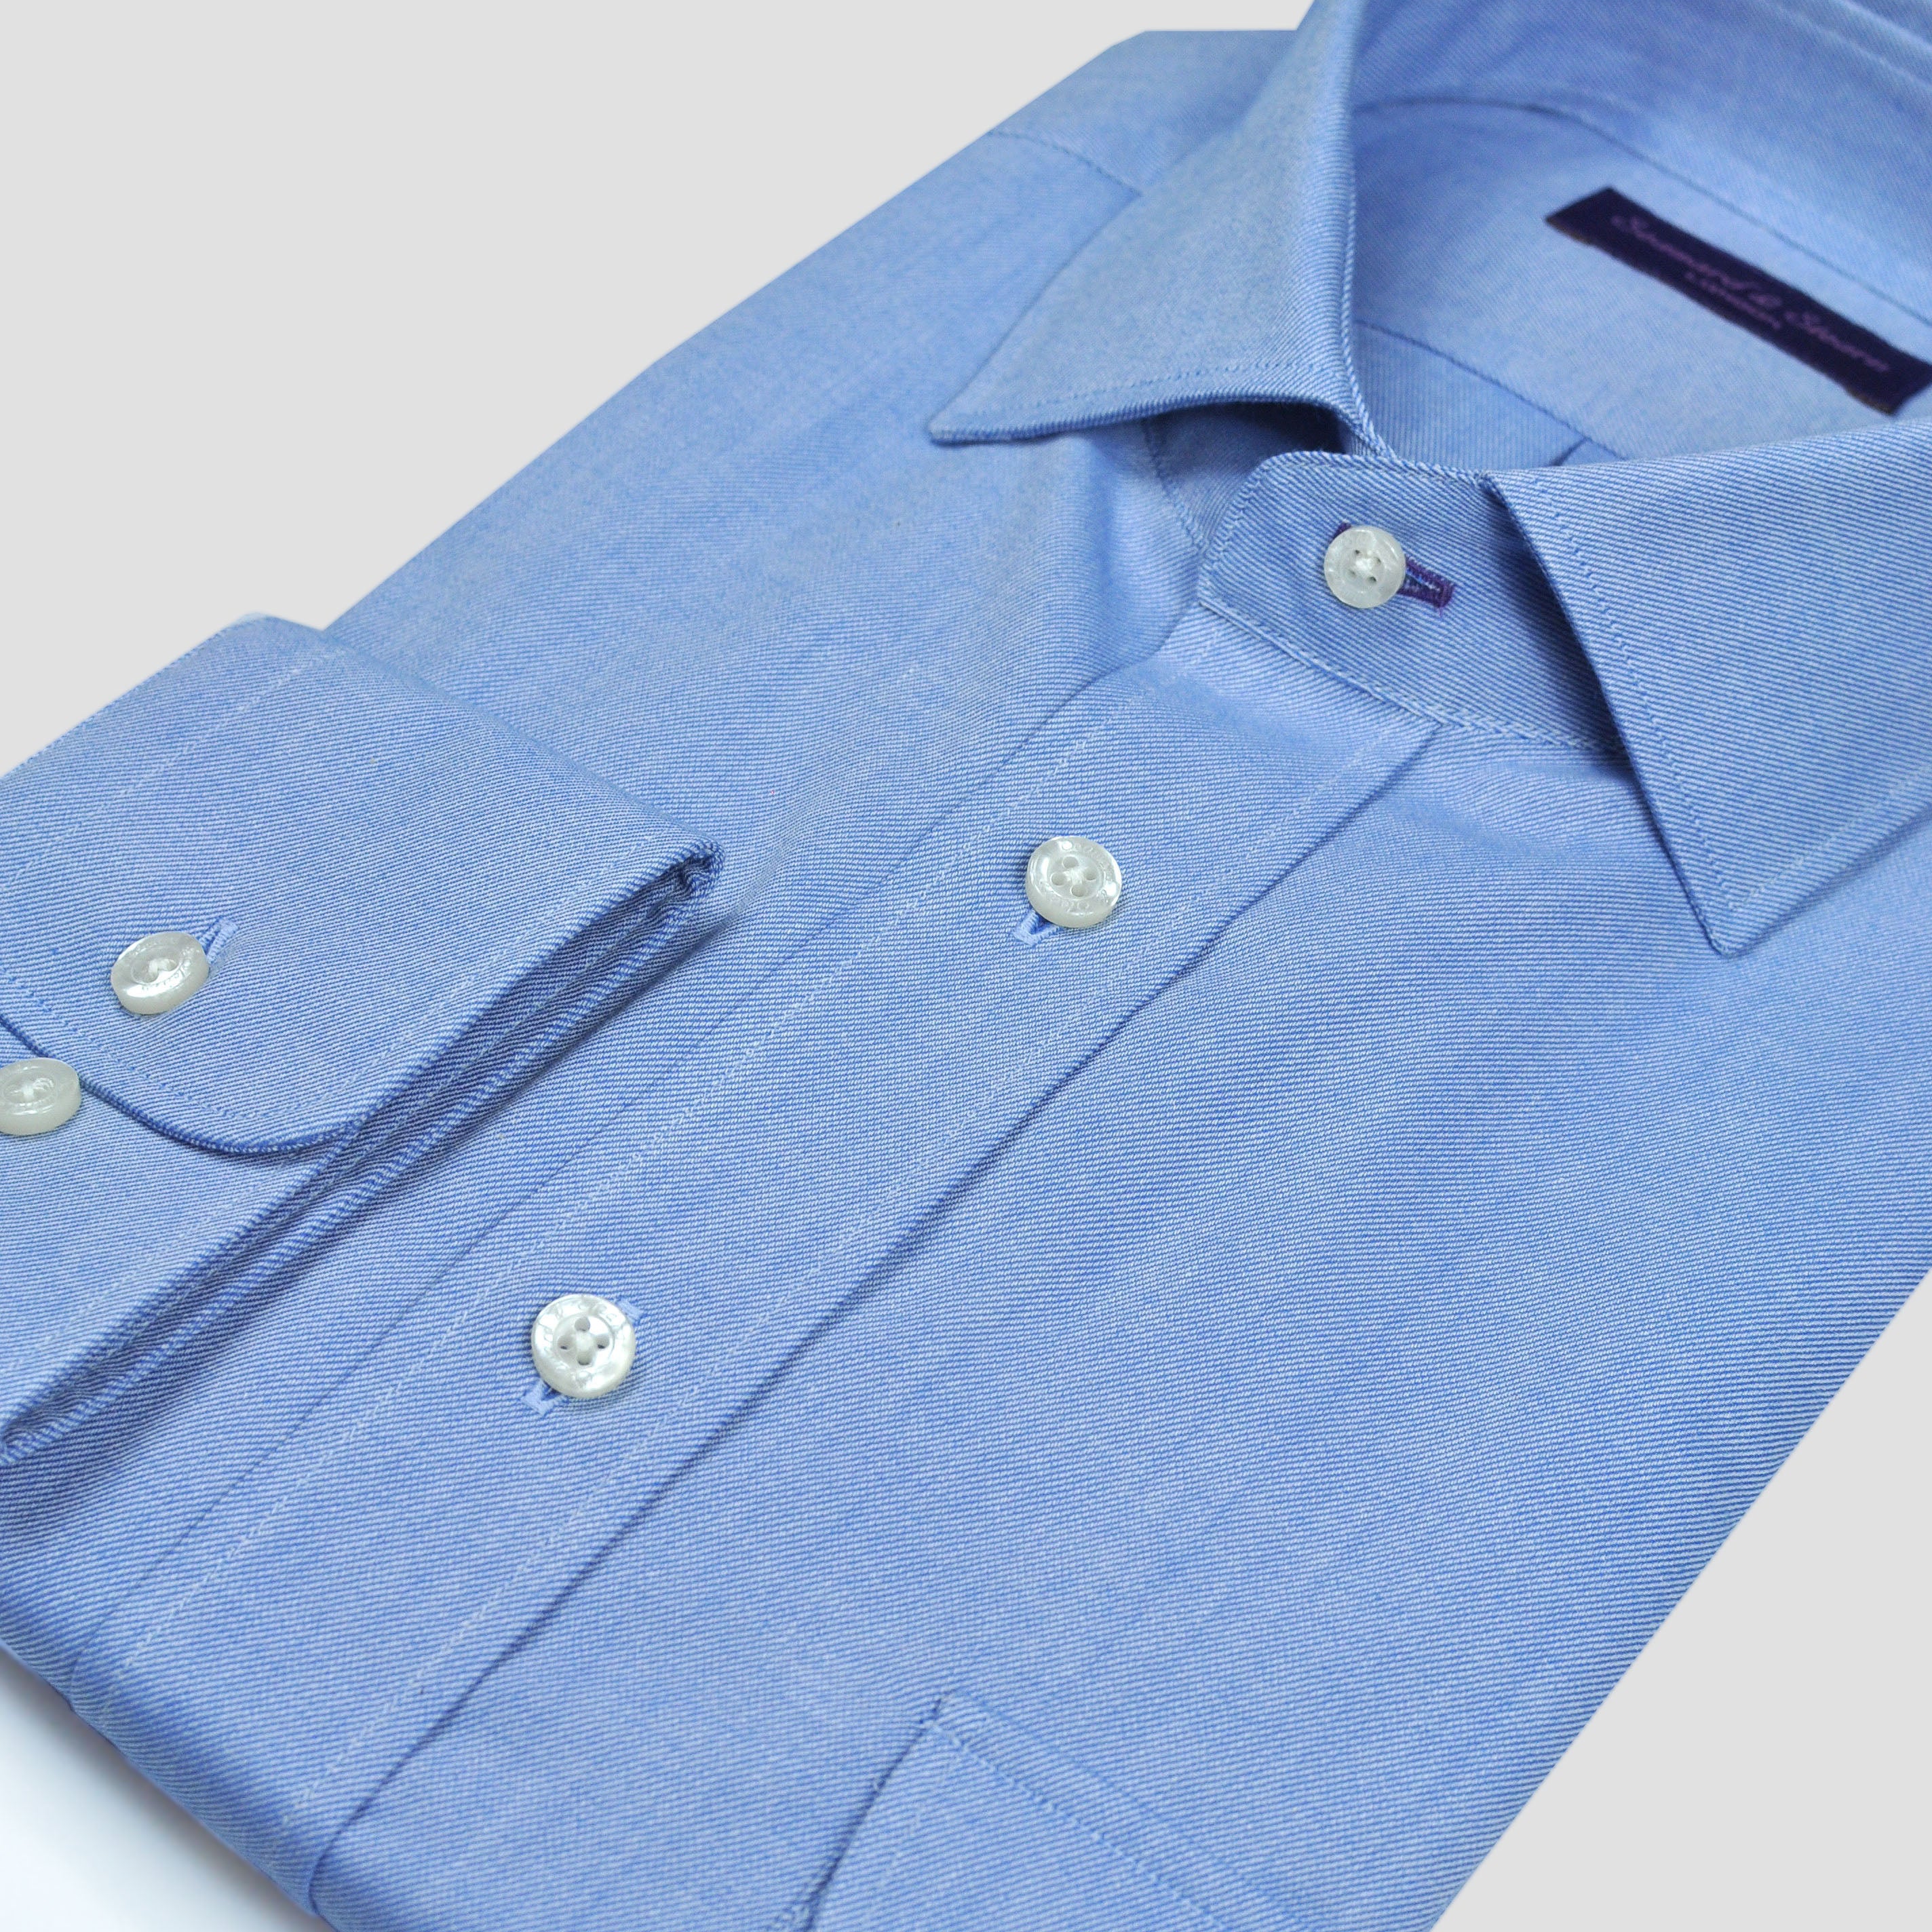 Classic Collar Reppe Shirt with Double Breast Button-Down Pockets in Light Blue